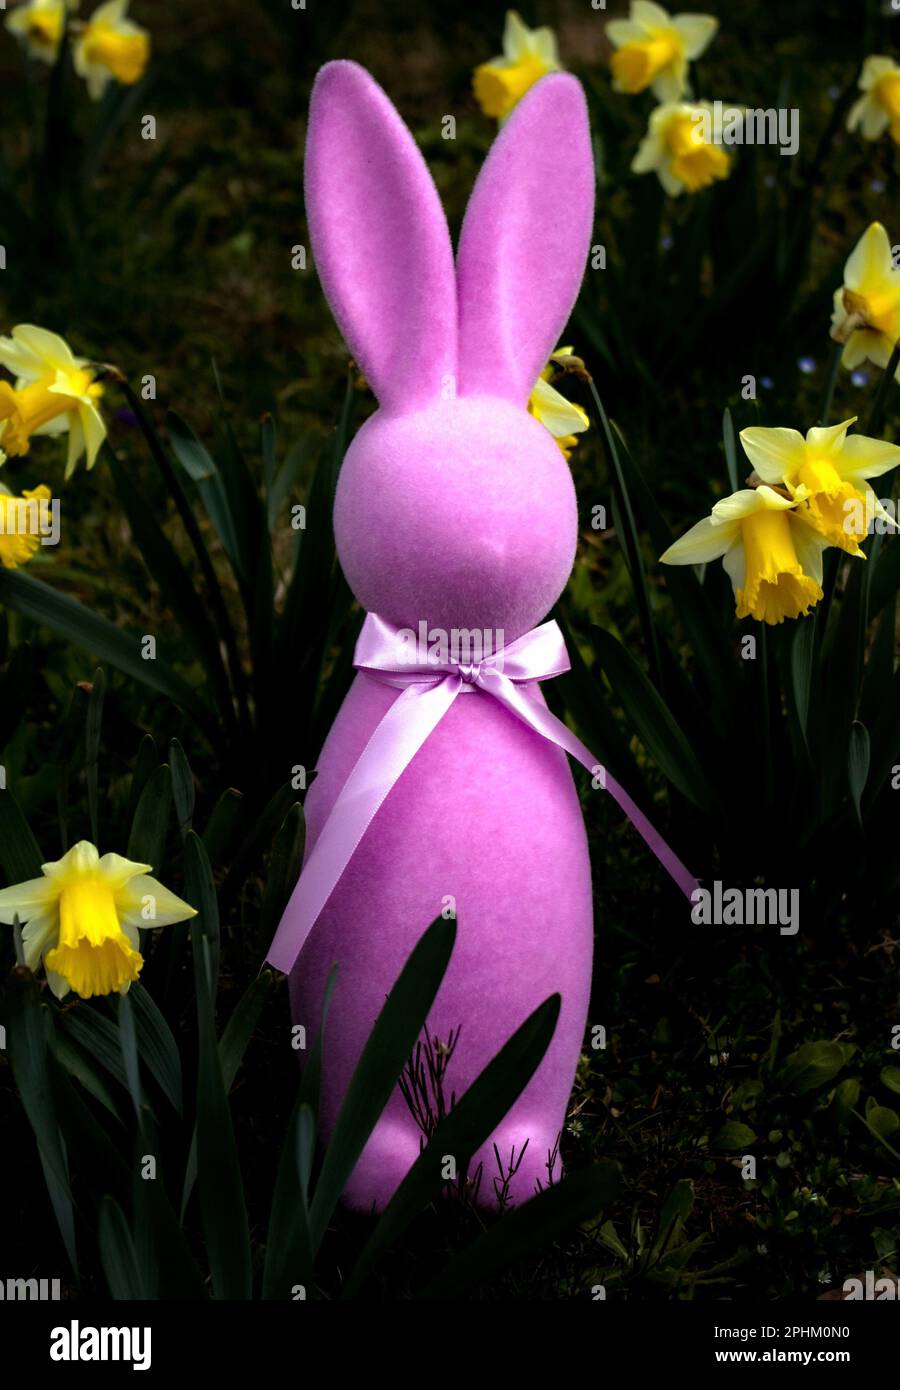 Purple decorative bunny rabbit standing in daffodils narcissus for easter decoration in southern wv united states of america Stock Photo